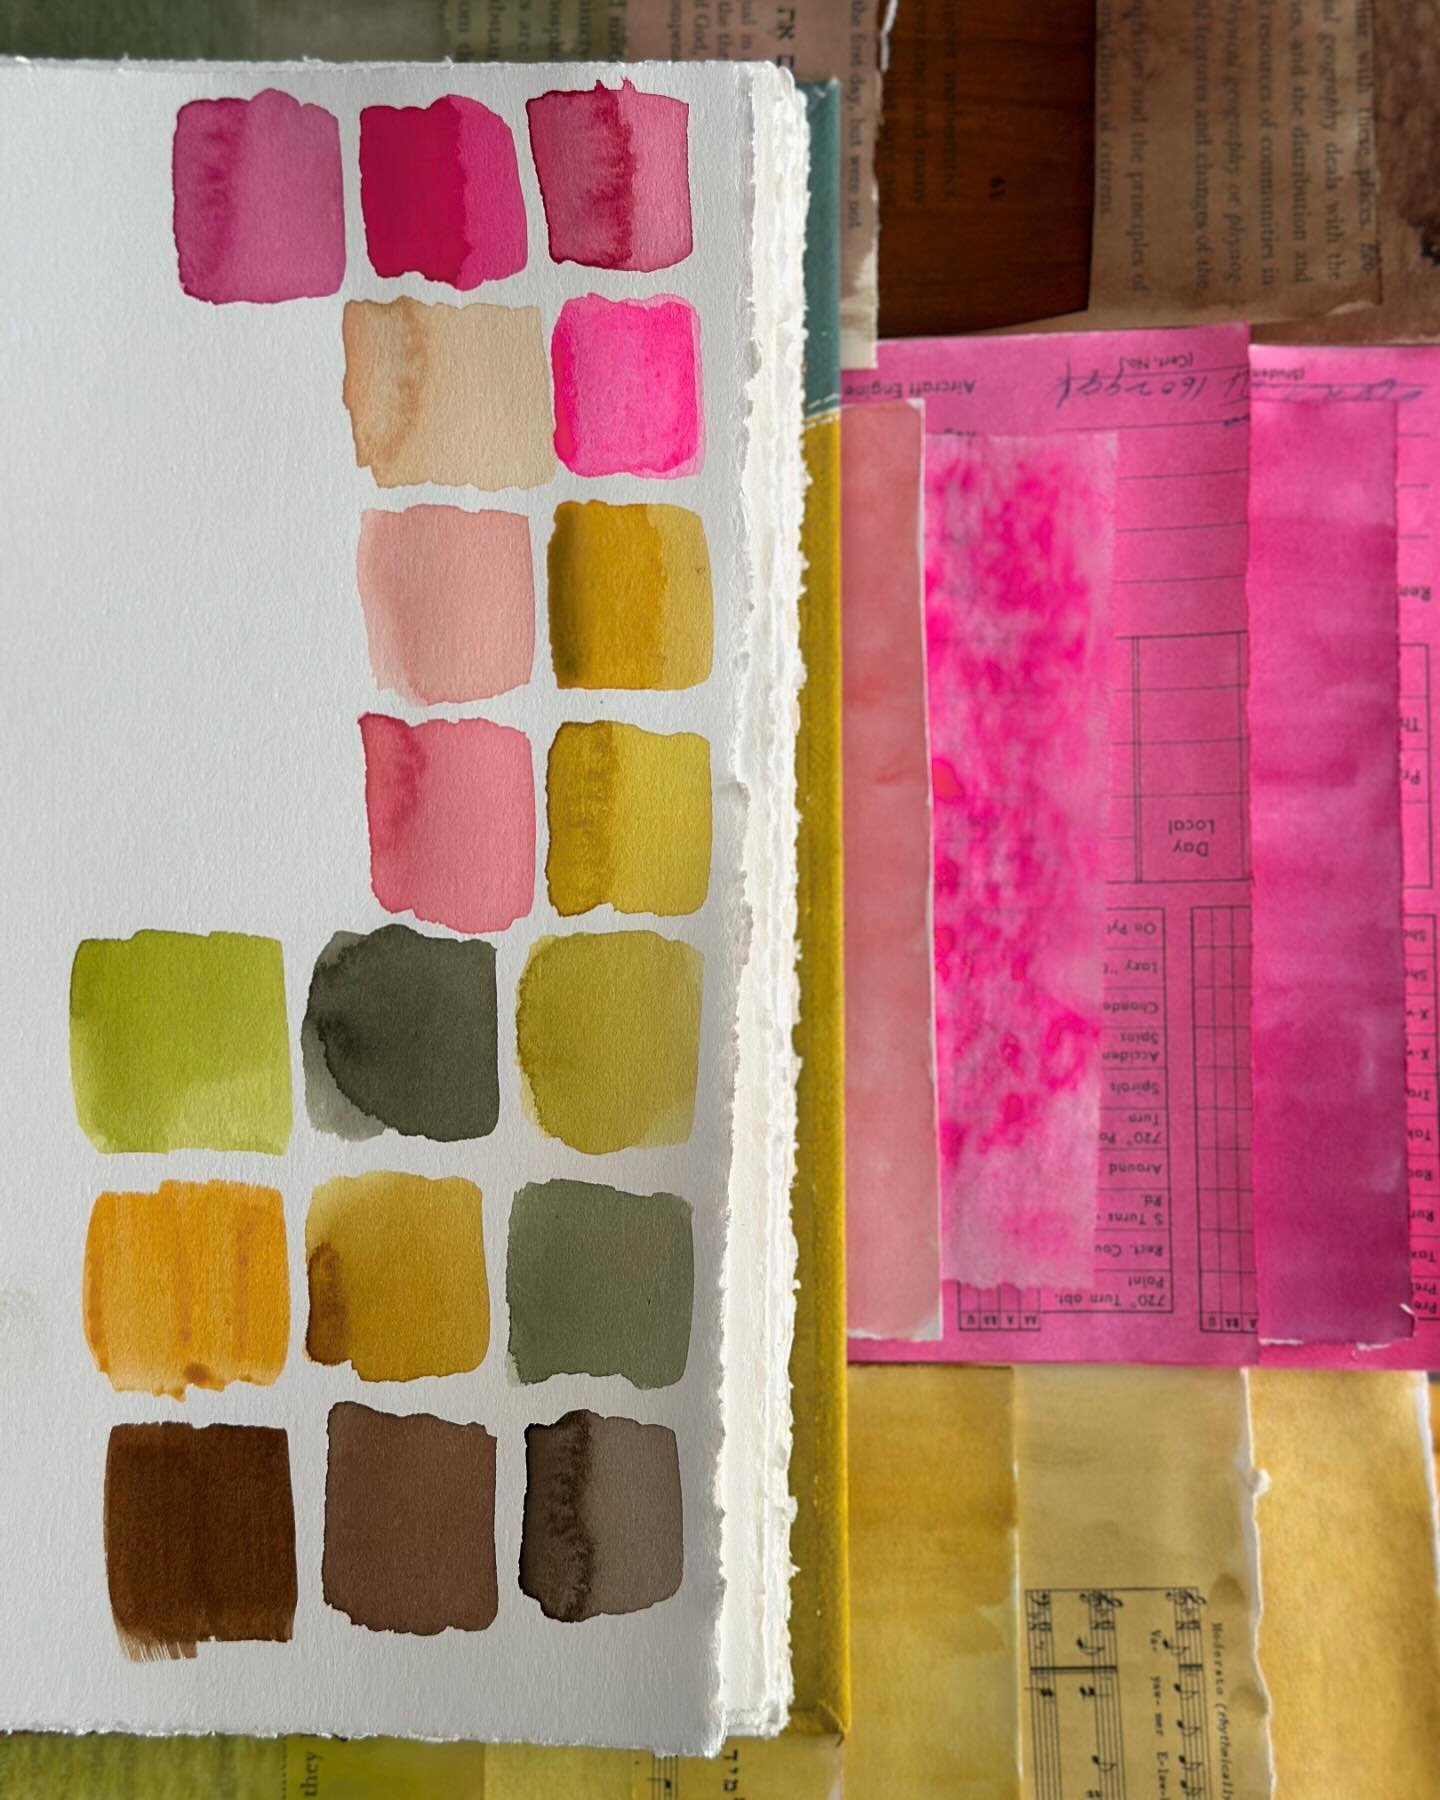 Yesterday I worked on Susanne Randers&rsquo; @mitkrearum lessons for #mayfodderschool3 and I can see how much my favorite personal color palette has been evolving slowly over time and getting better and better. Her exercise of painted papers using al